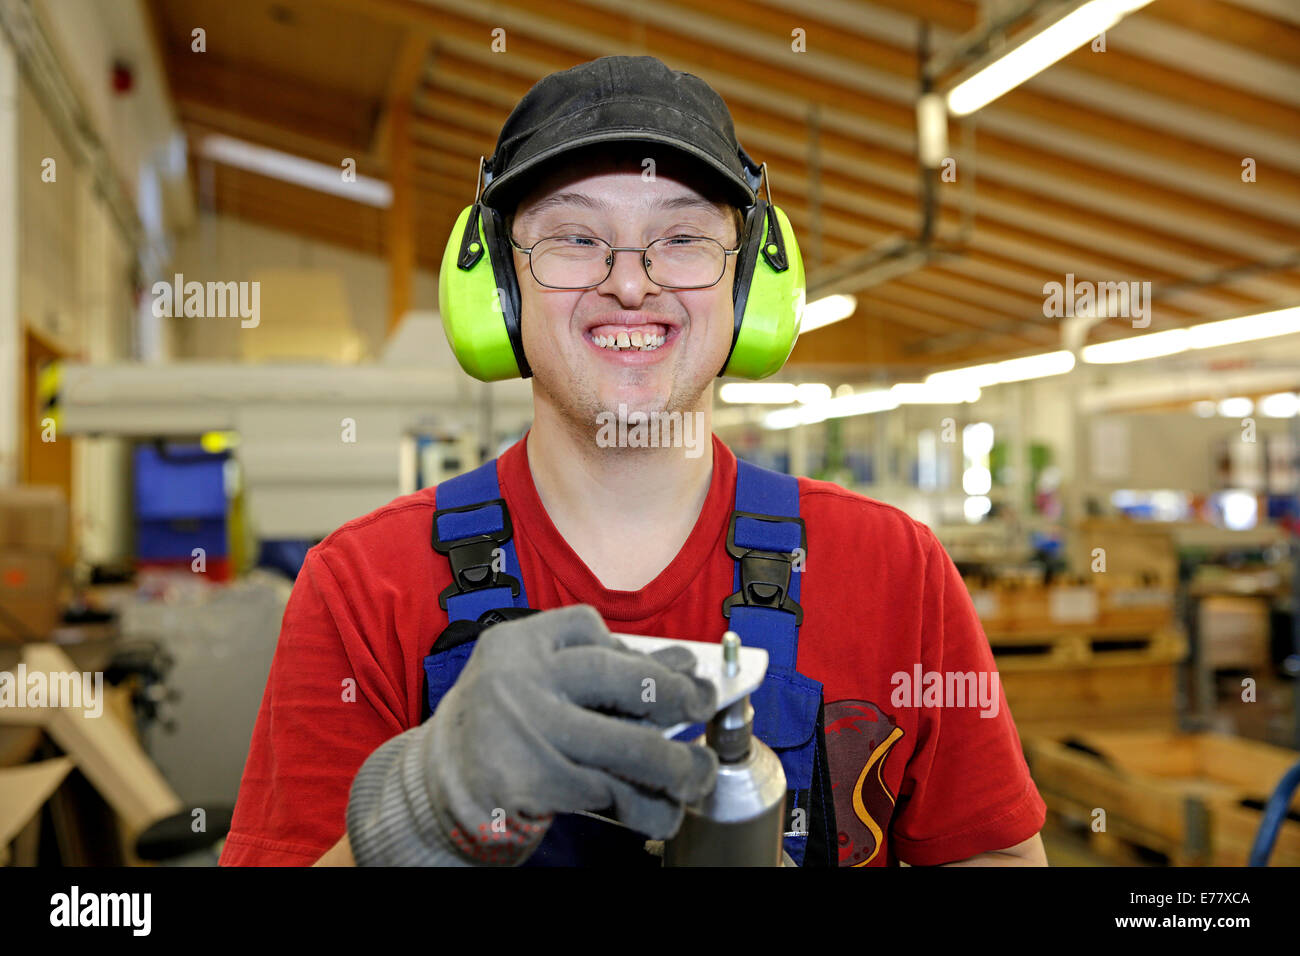 Man with Down syndrome at work Stock Photo